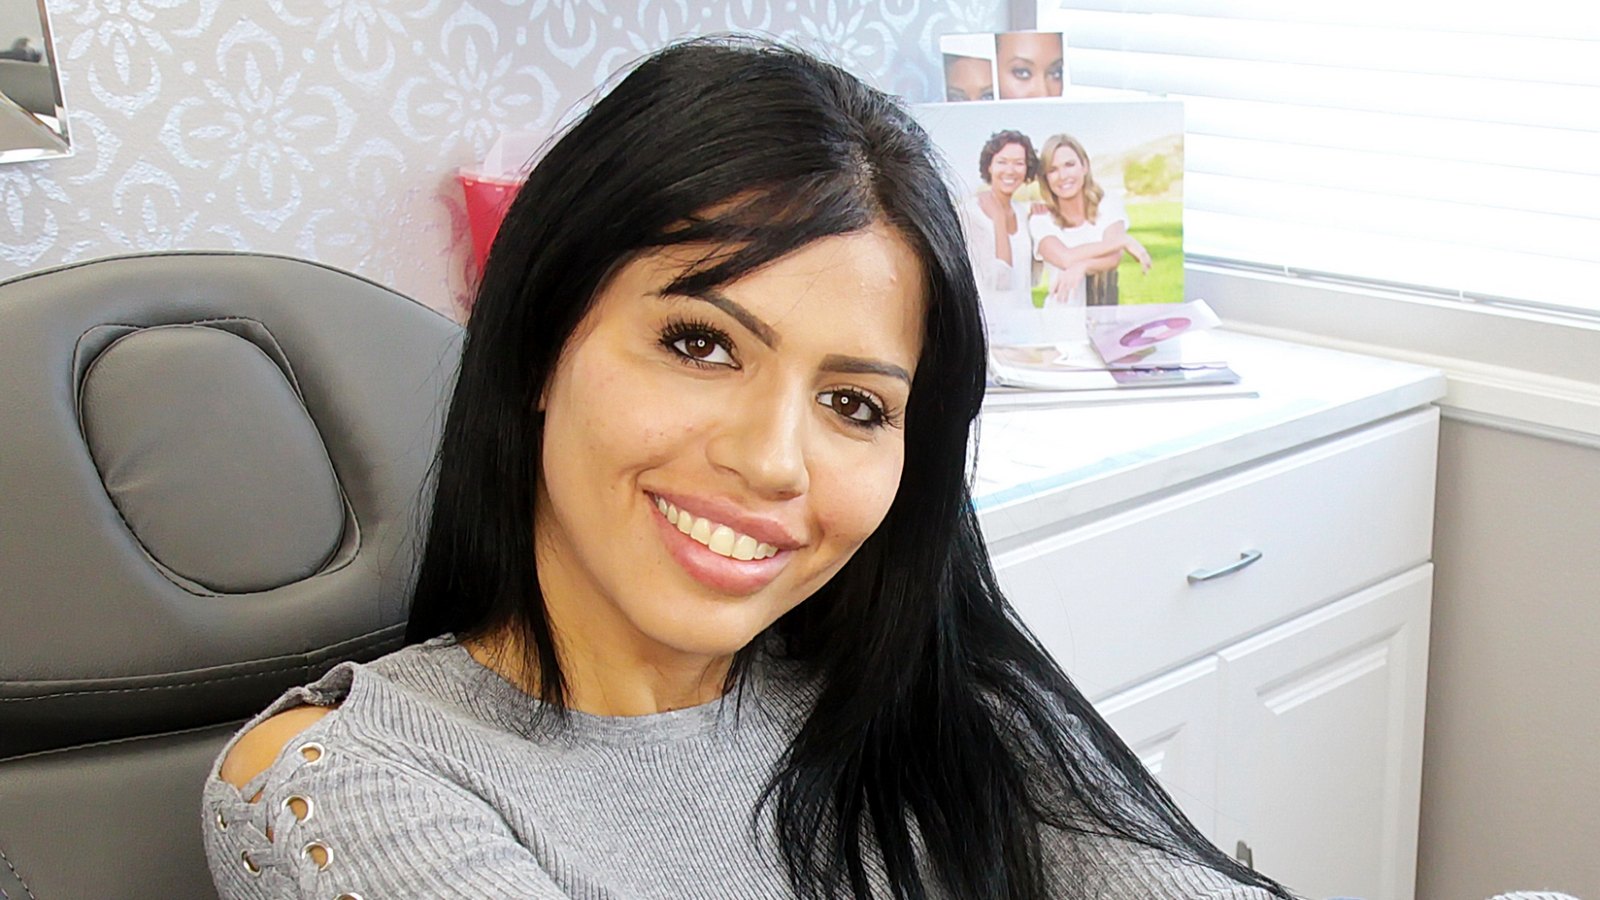 90 Day Fiance's Larissa Is 'Addicted' to Plastic Surgery